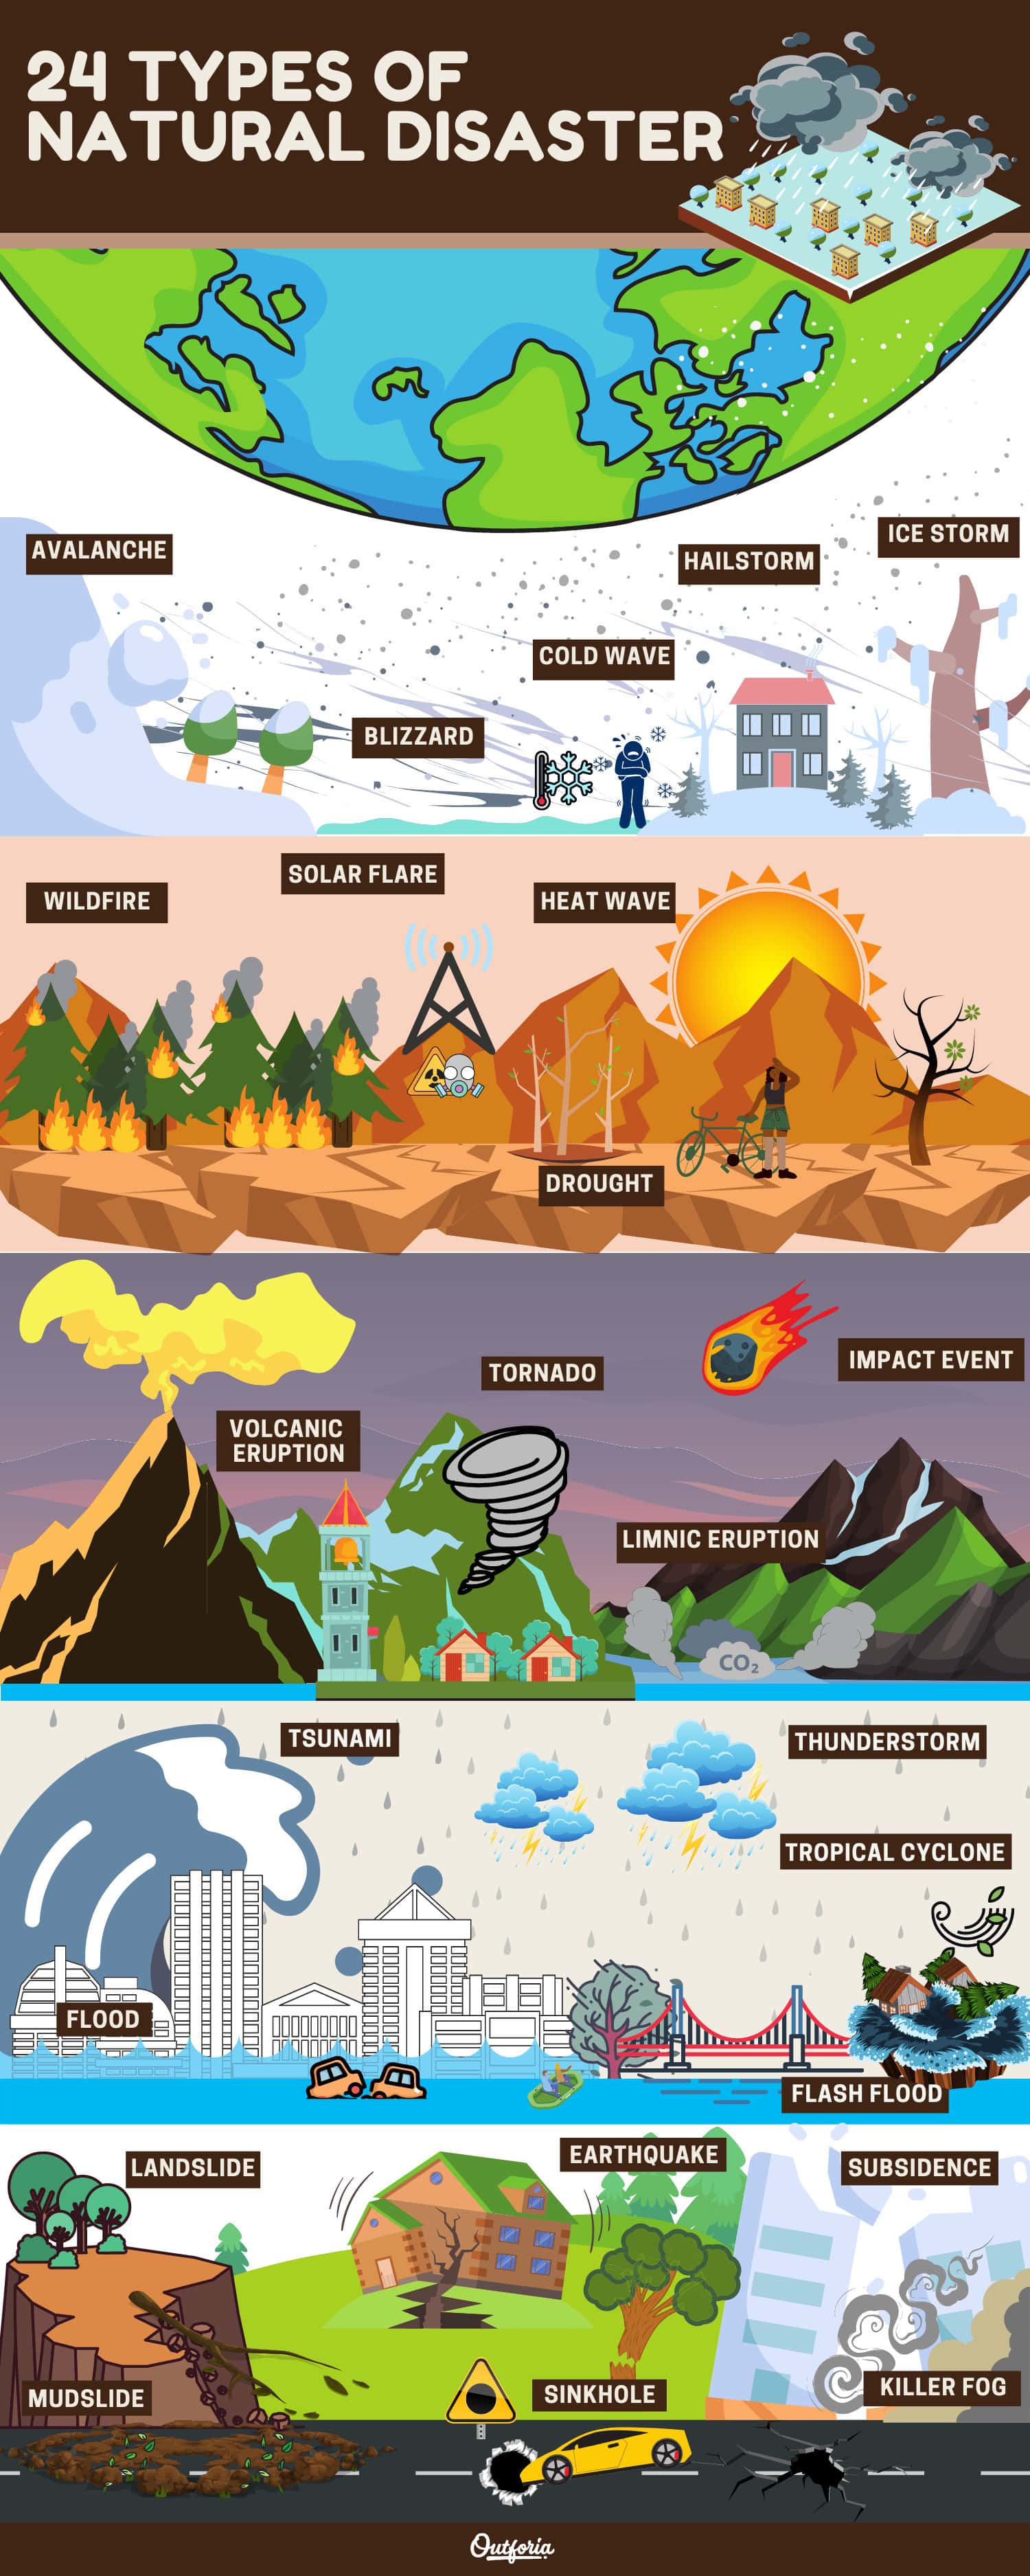 24 Types of Natural Disasters That You Need To Know - Outforia | [Source: Outforia | outforia.com]